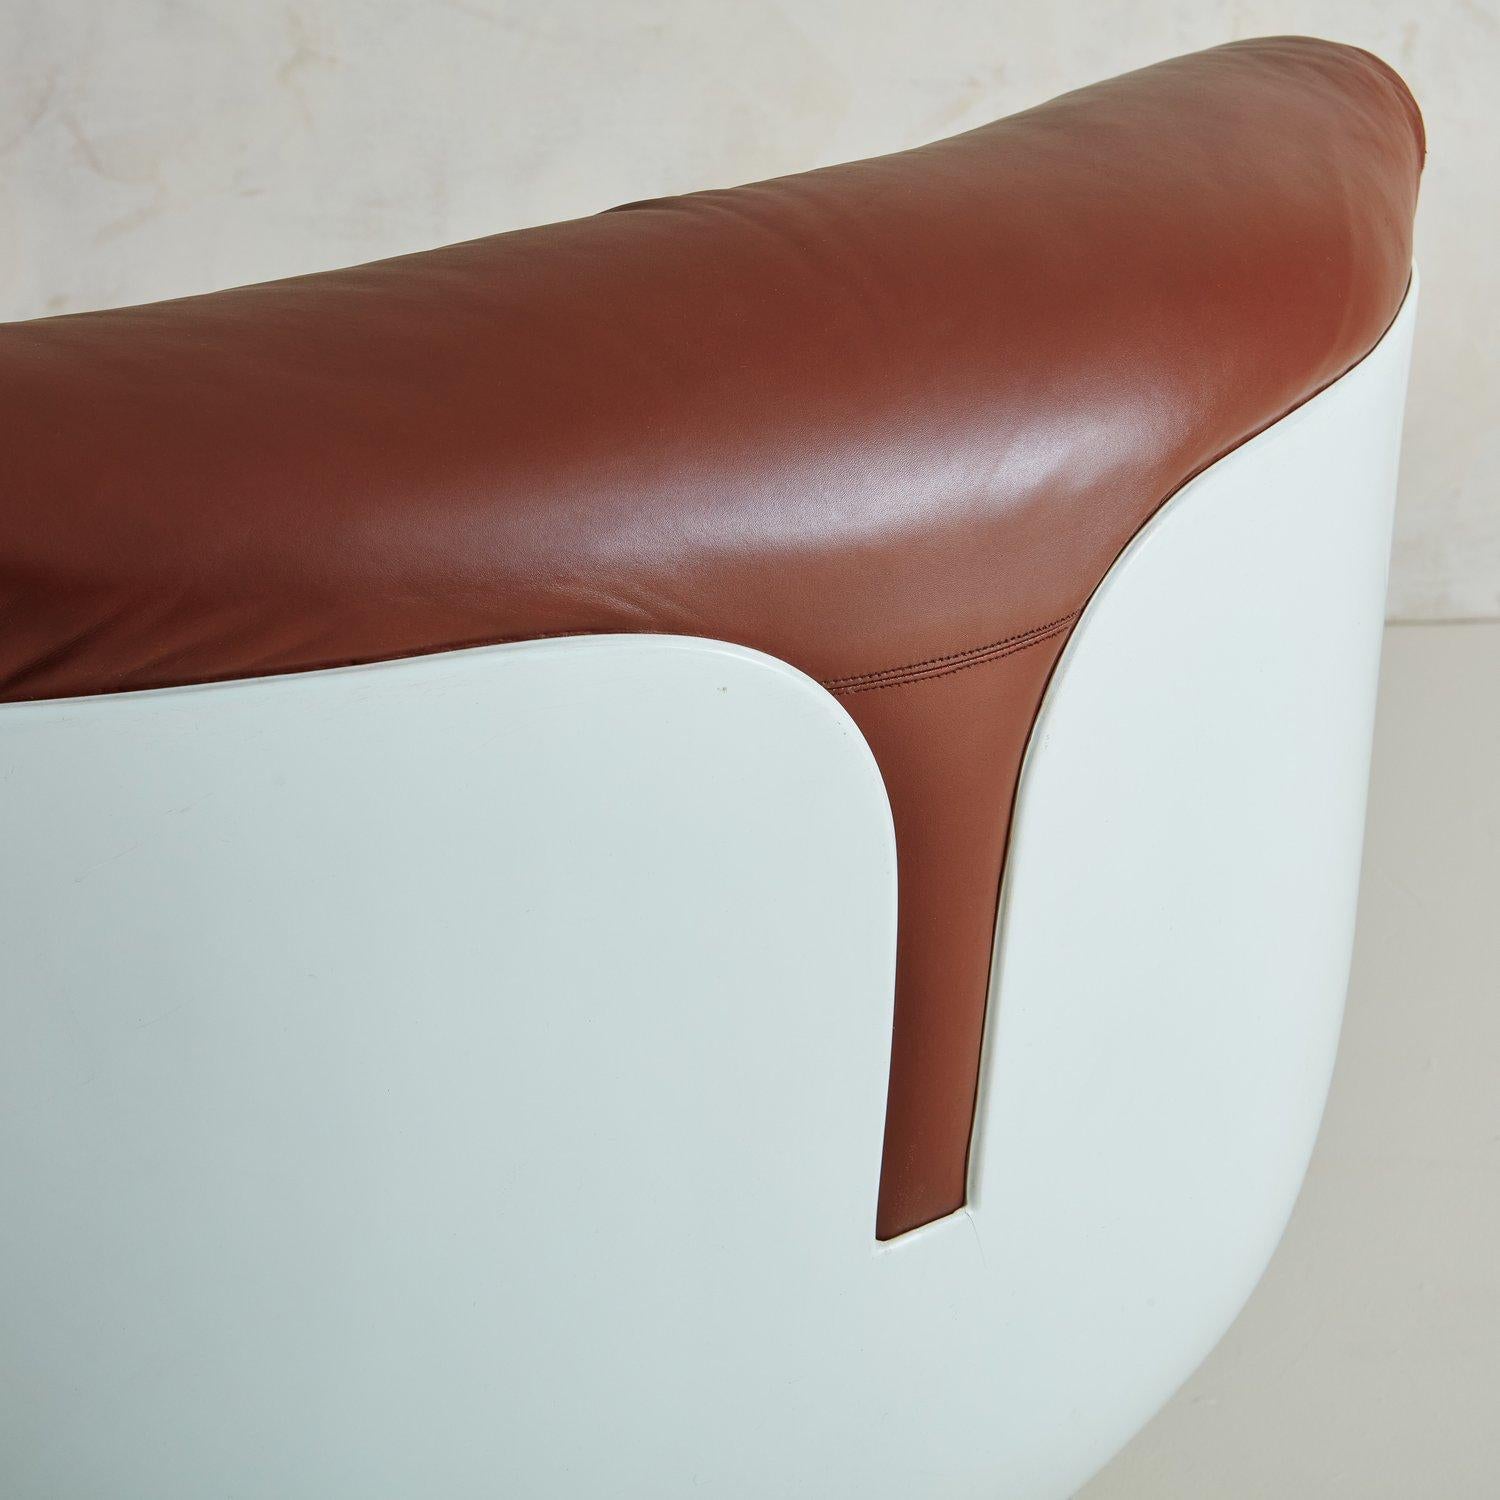 Leather Flou Lounge Chairs by Augusto Betti for Habitat Faenza, 1968 '2 Available' For Sale